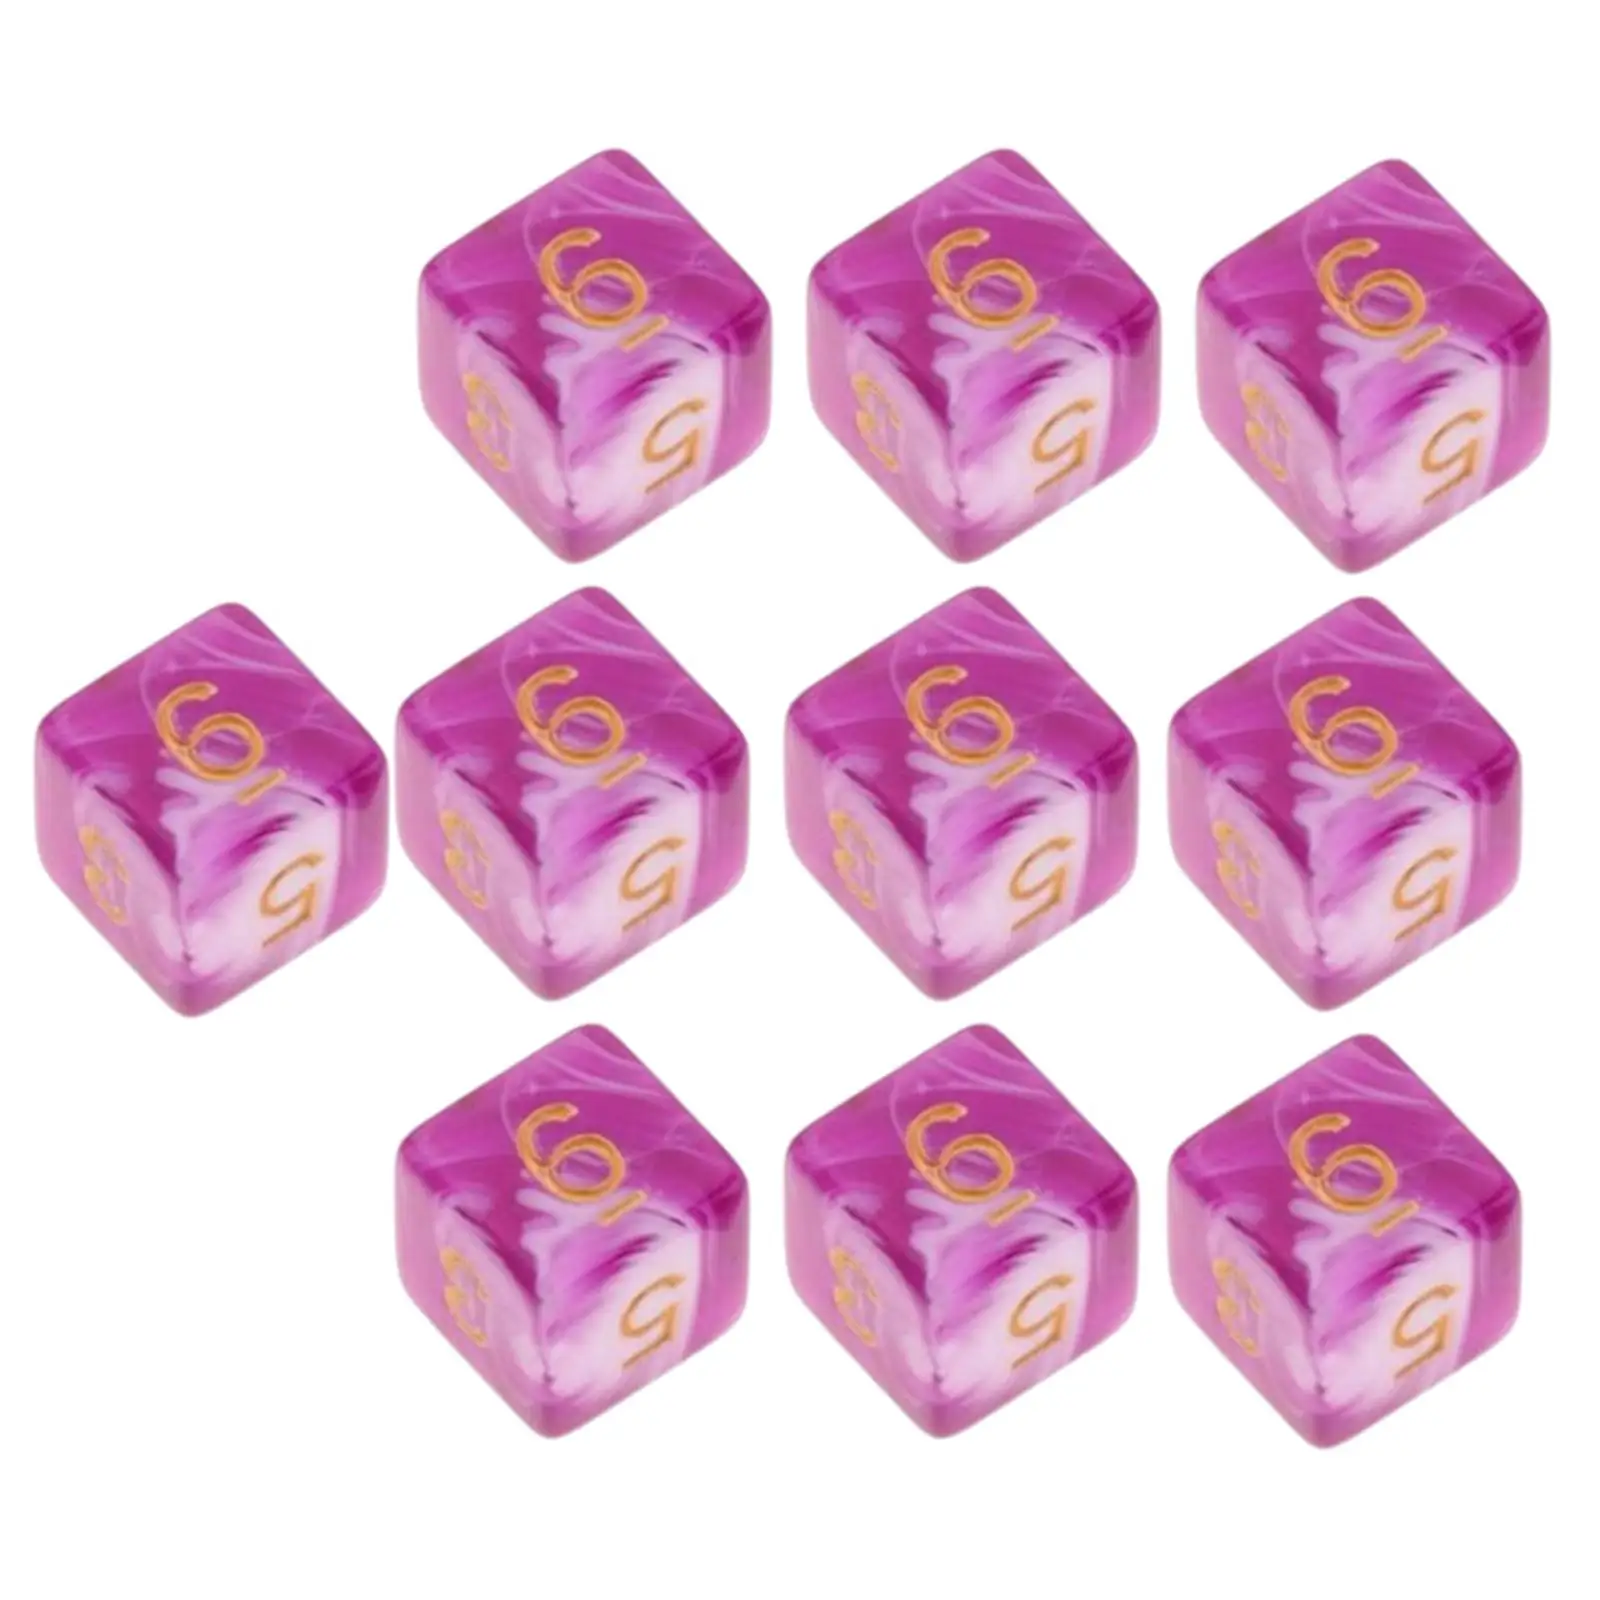 10 Pieces 6 Sides Dice Entertainment Toys Math Teaching Aids Game Dice for Board Party Roll Playing Table Game